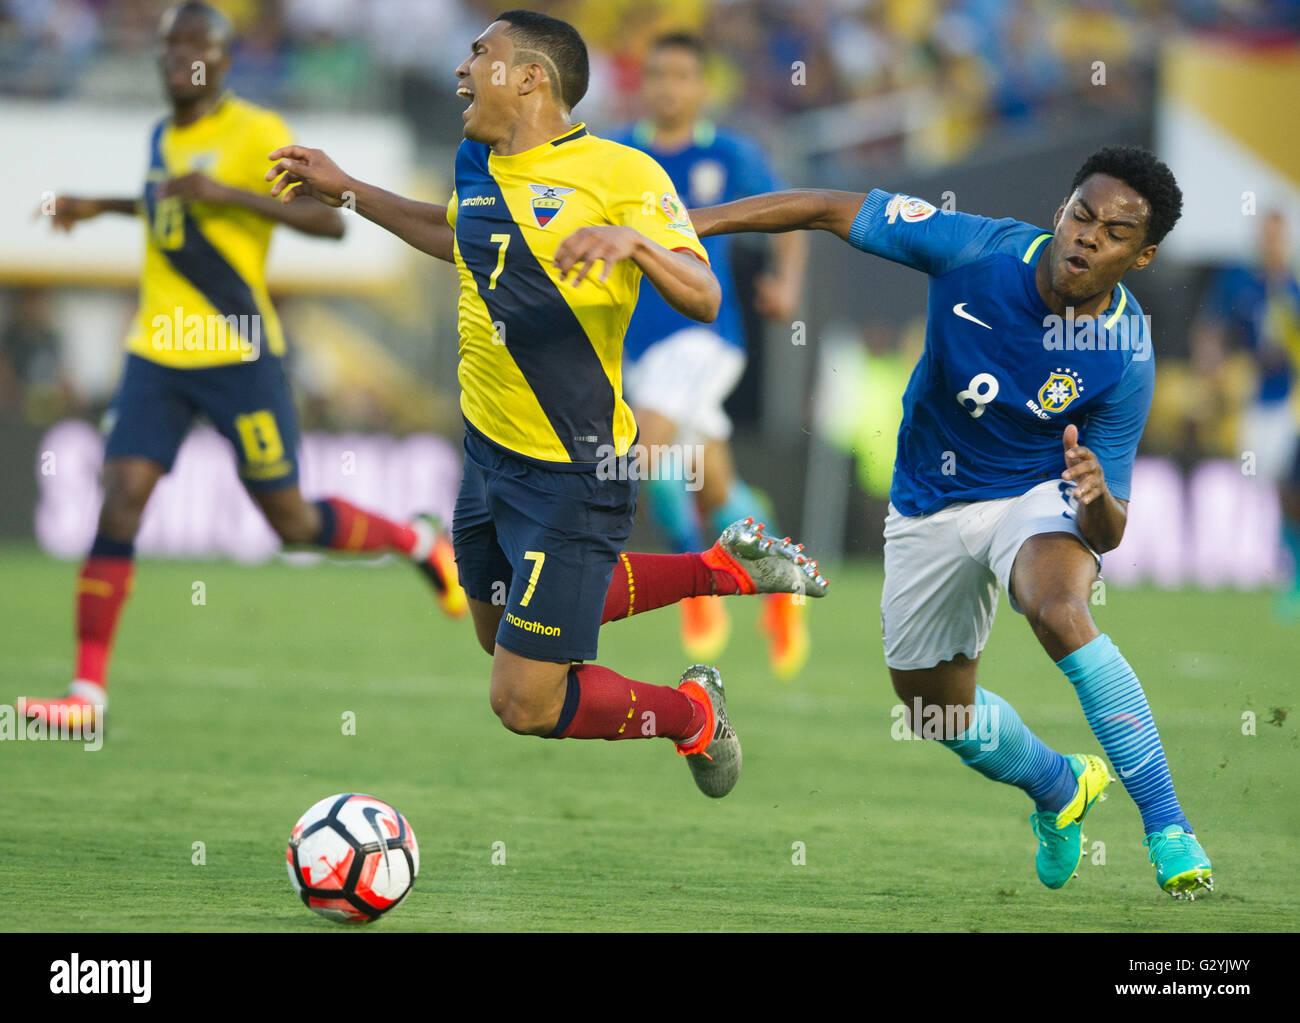 Pasadena, USA. 4th June, 2016. Jefferson Montero (L) of Ecuador is fouled by Elias of Brazil during their 2016 Copa America Centenario Group B match in Pasadena, the United States, June 4, 2016. The match ended with a 0-0 draw. © Yang Lei/Xinhua/Alamy Live News Stock Photo